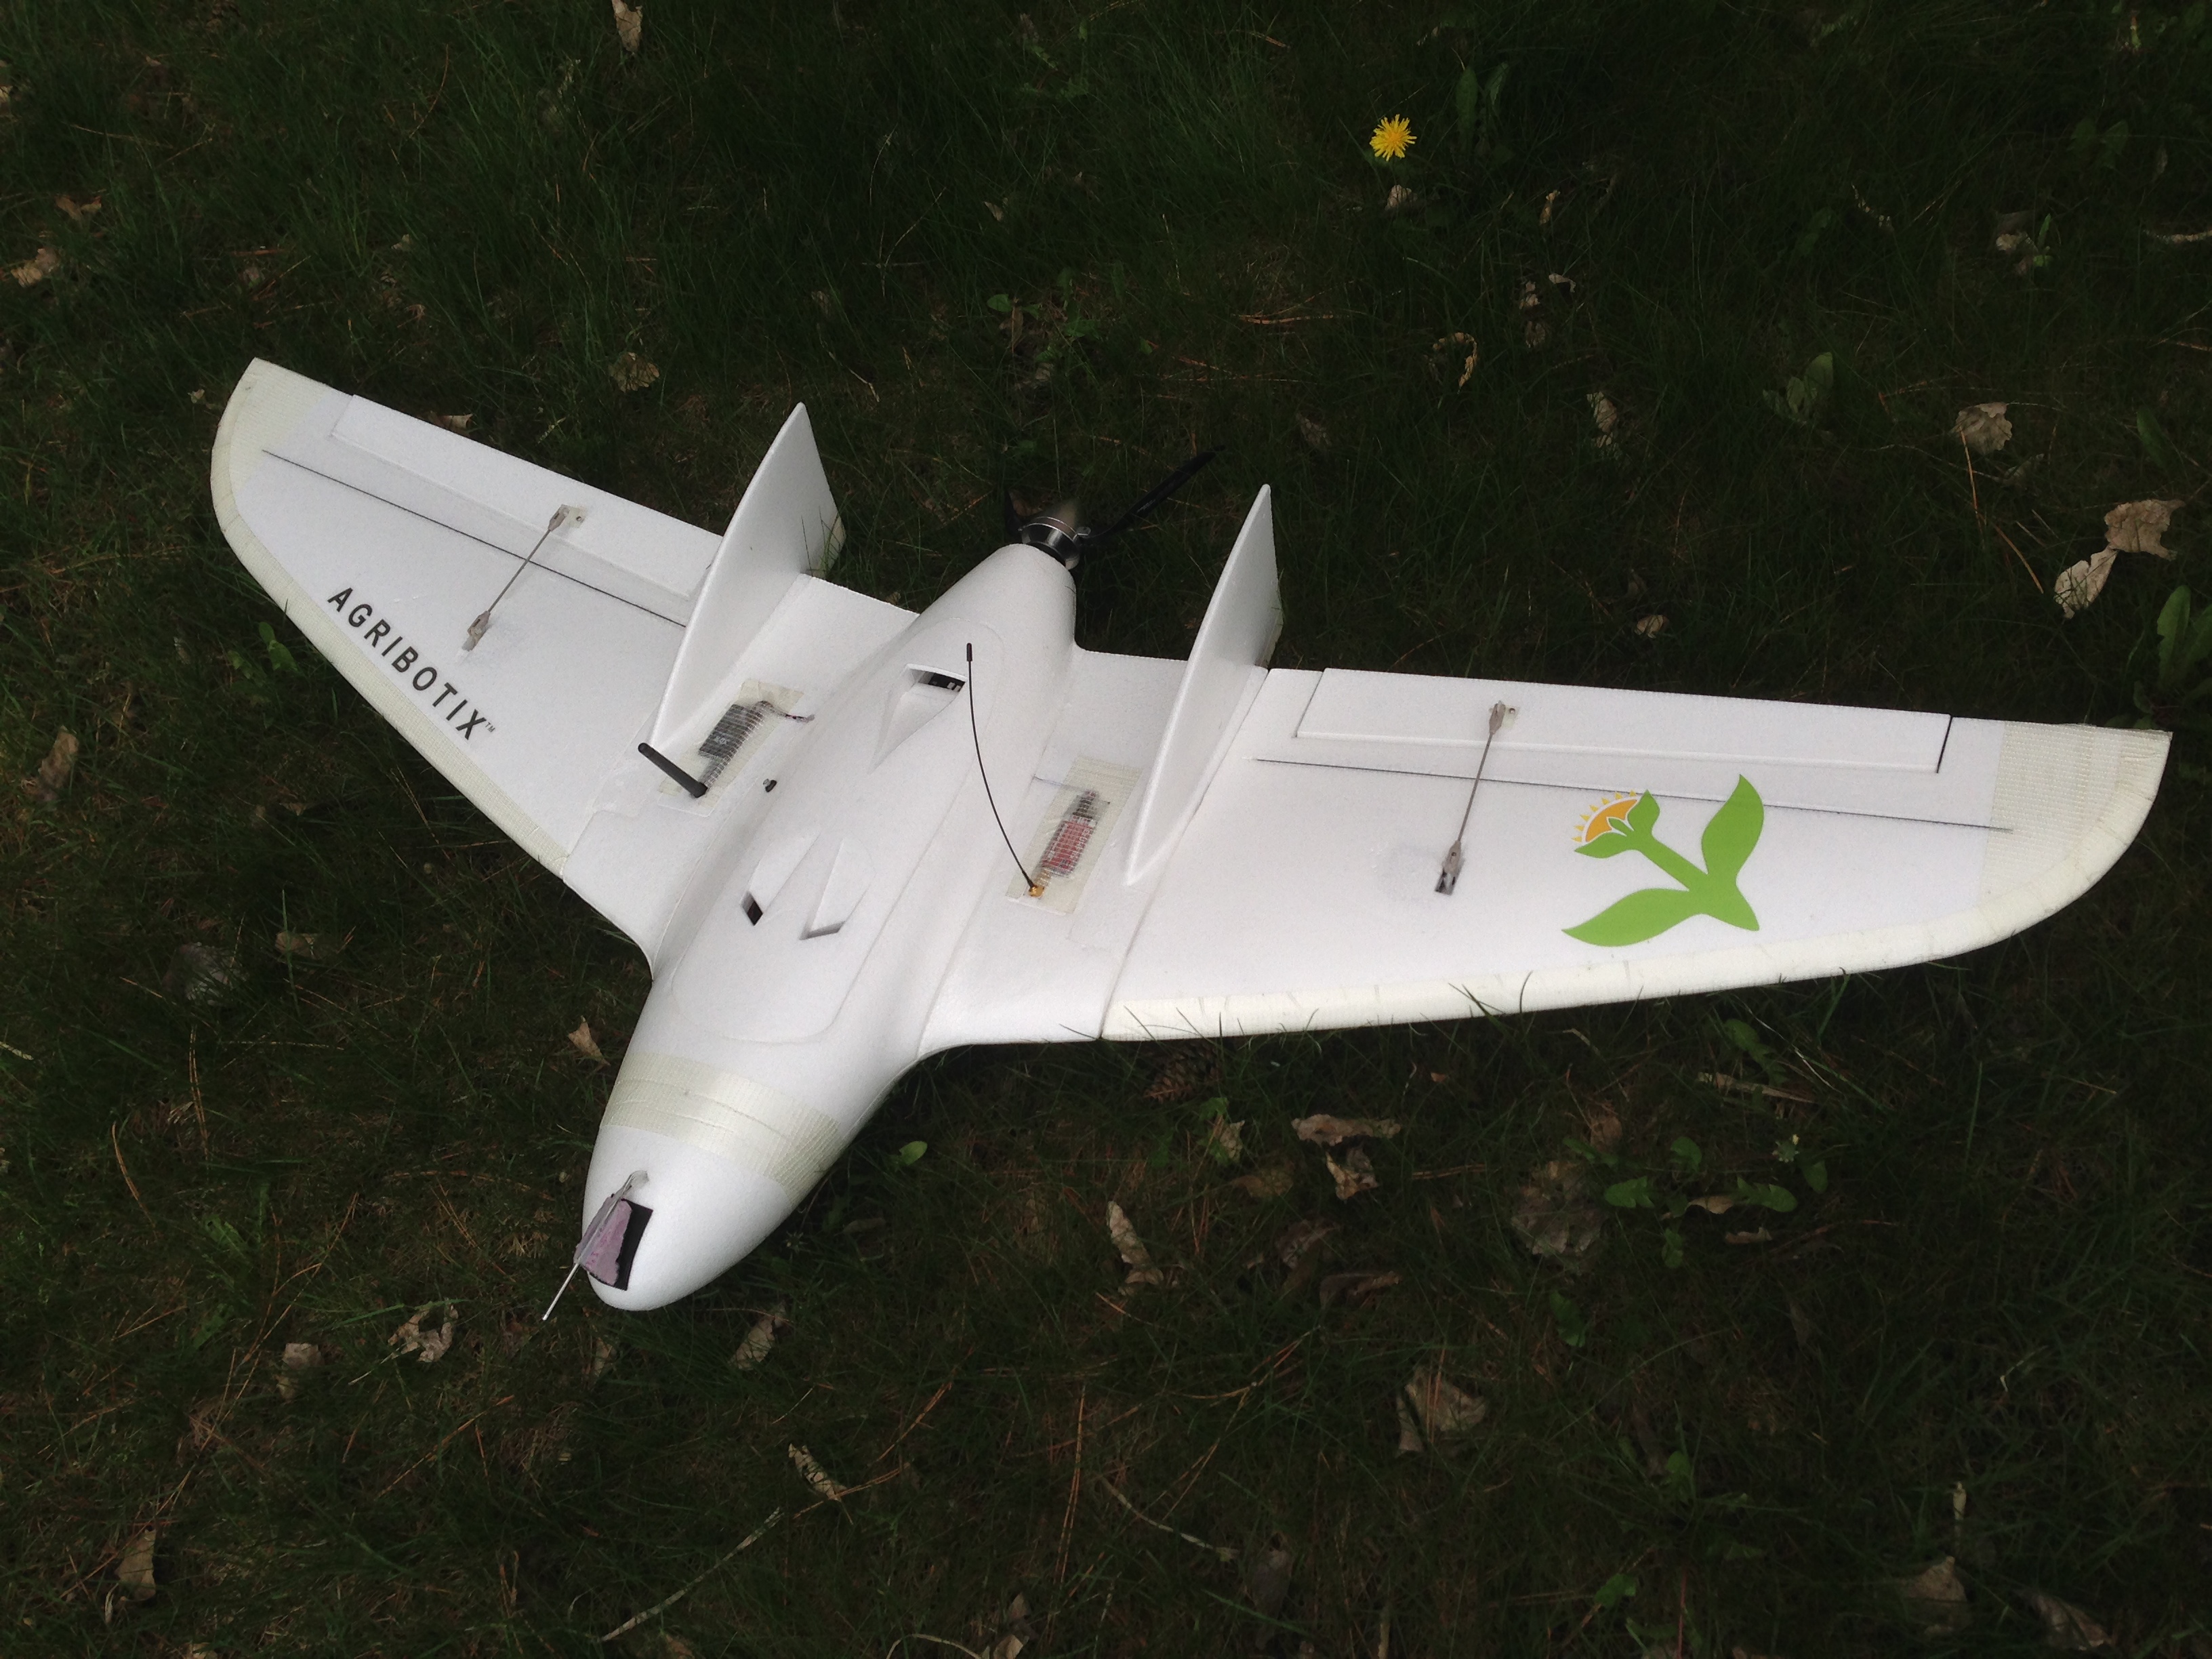 toilet Wizard Prelude The Agribotix Guide to Drones in Agriculture - News - SparkFun Electronics